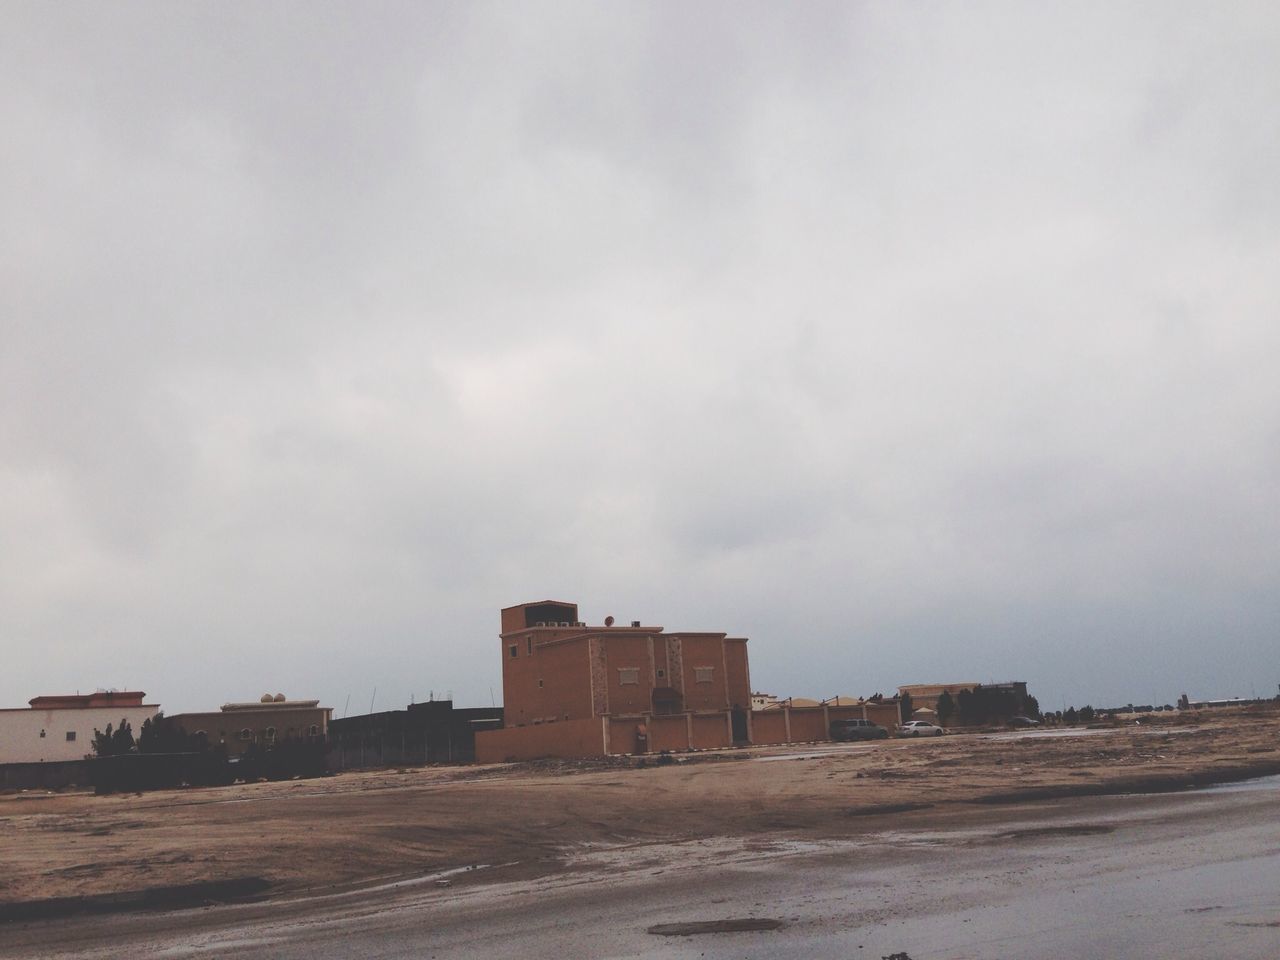 architecture, built structure, building exterior, sky, cloud - sky, house, cloudy, sand, day, abandoned, outdoors, overcast, beach, cloud, no people, road, building, old, residential structure, street